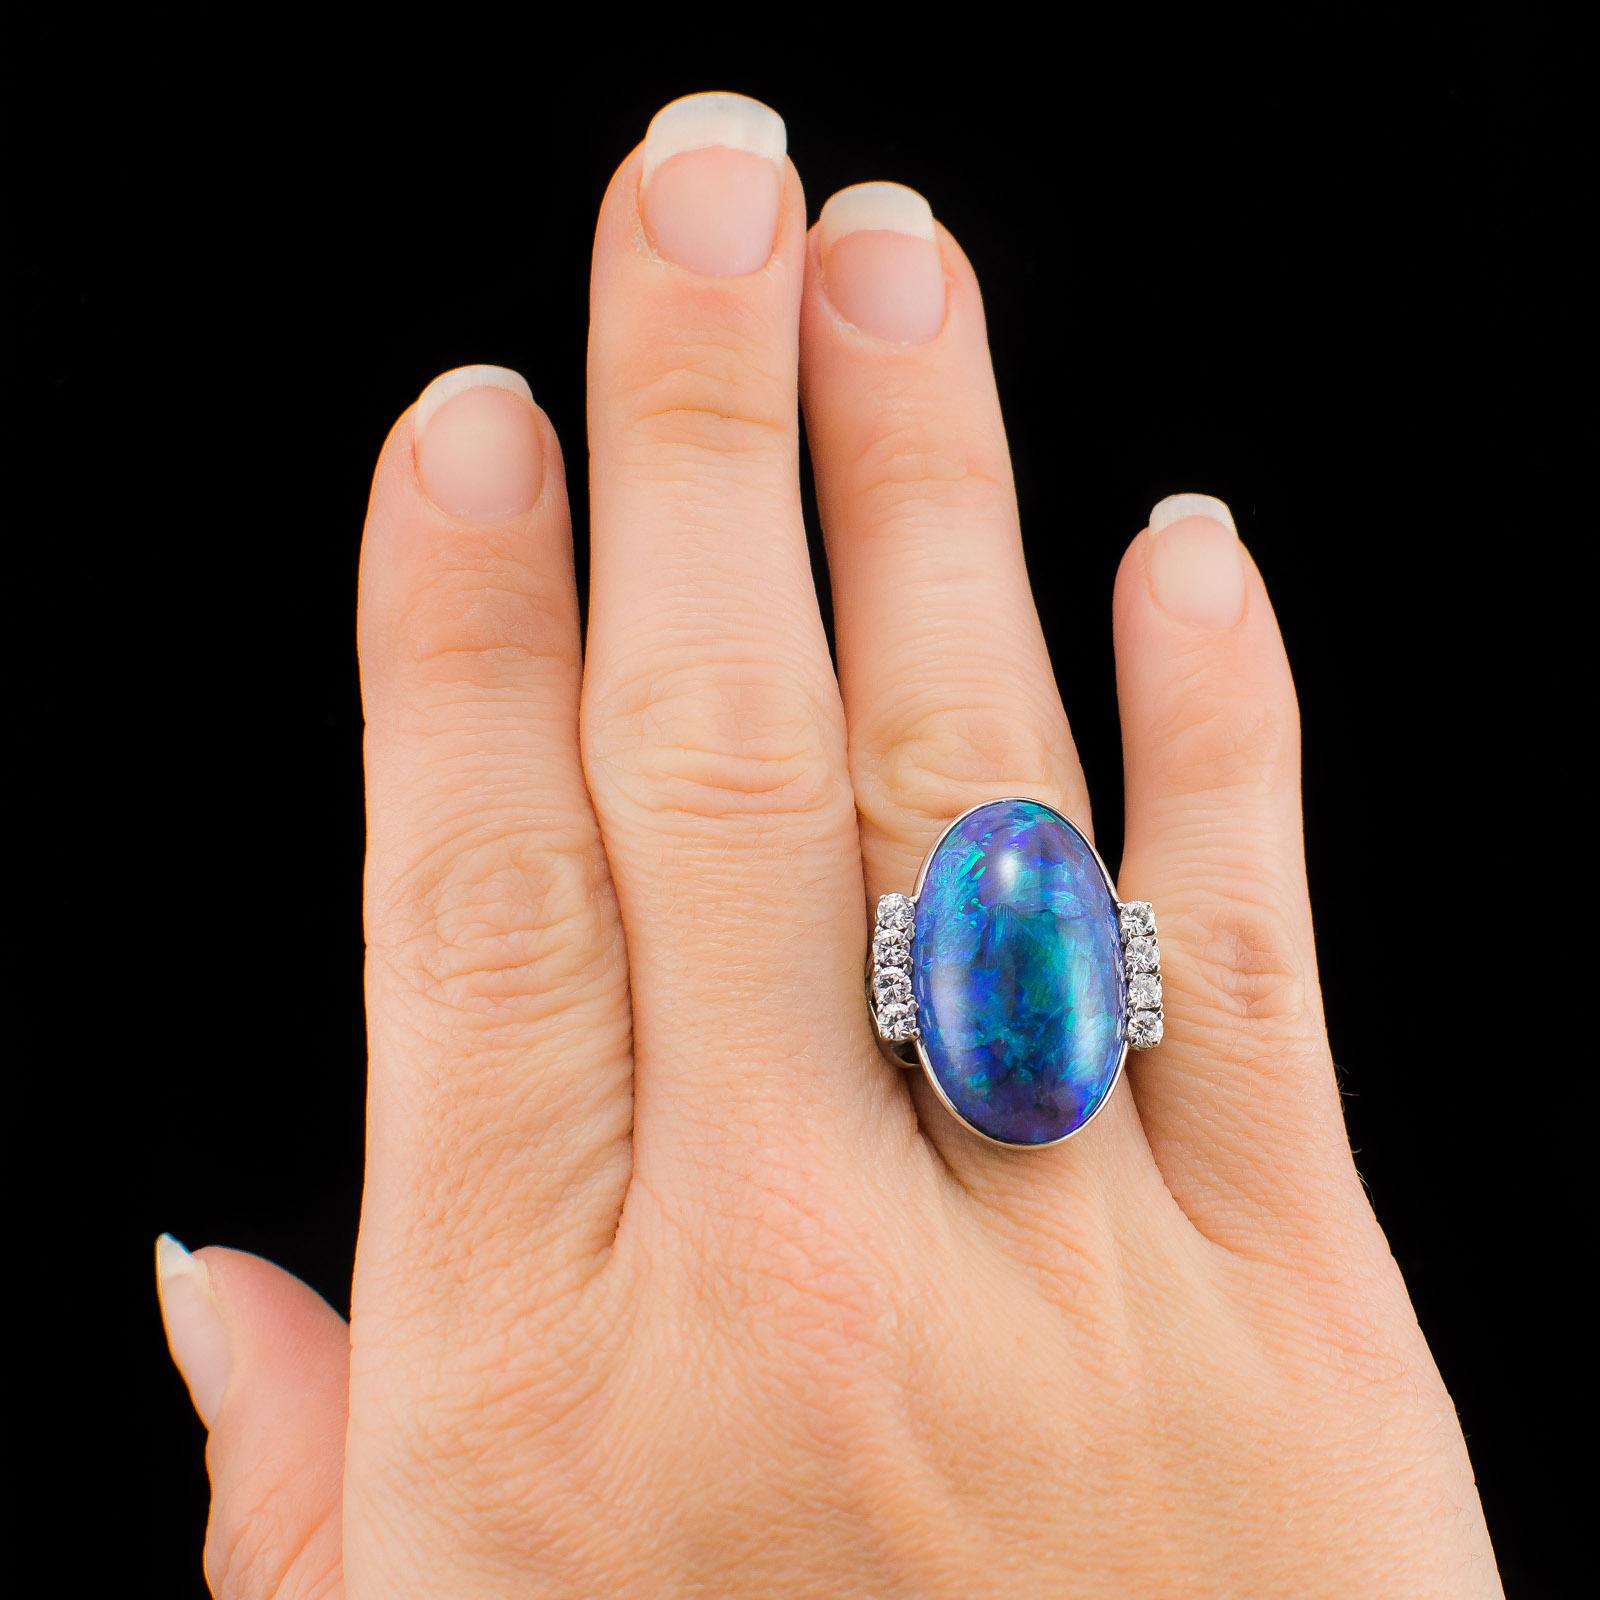 This is an exquisite Translucent Cabochon Black Opal Platinum Ring with GIA certification. This ring features a rare Translucent Black Opal displaying a stunning play of colors. The gorgeous opal measures 26.33 x 16.33 x 7.87 mm. with (8) Round